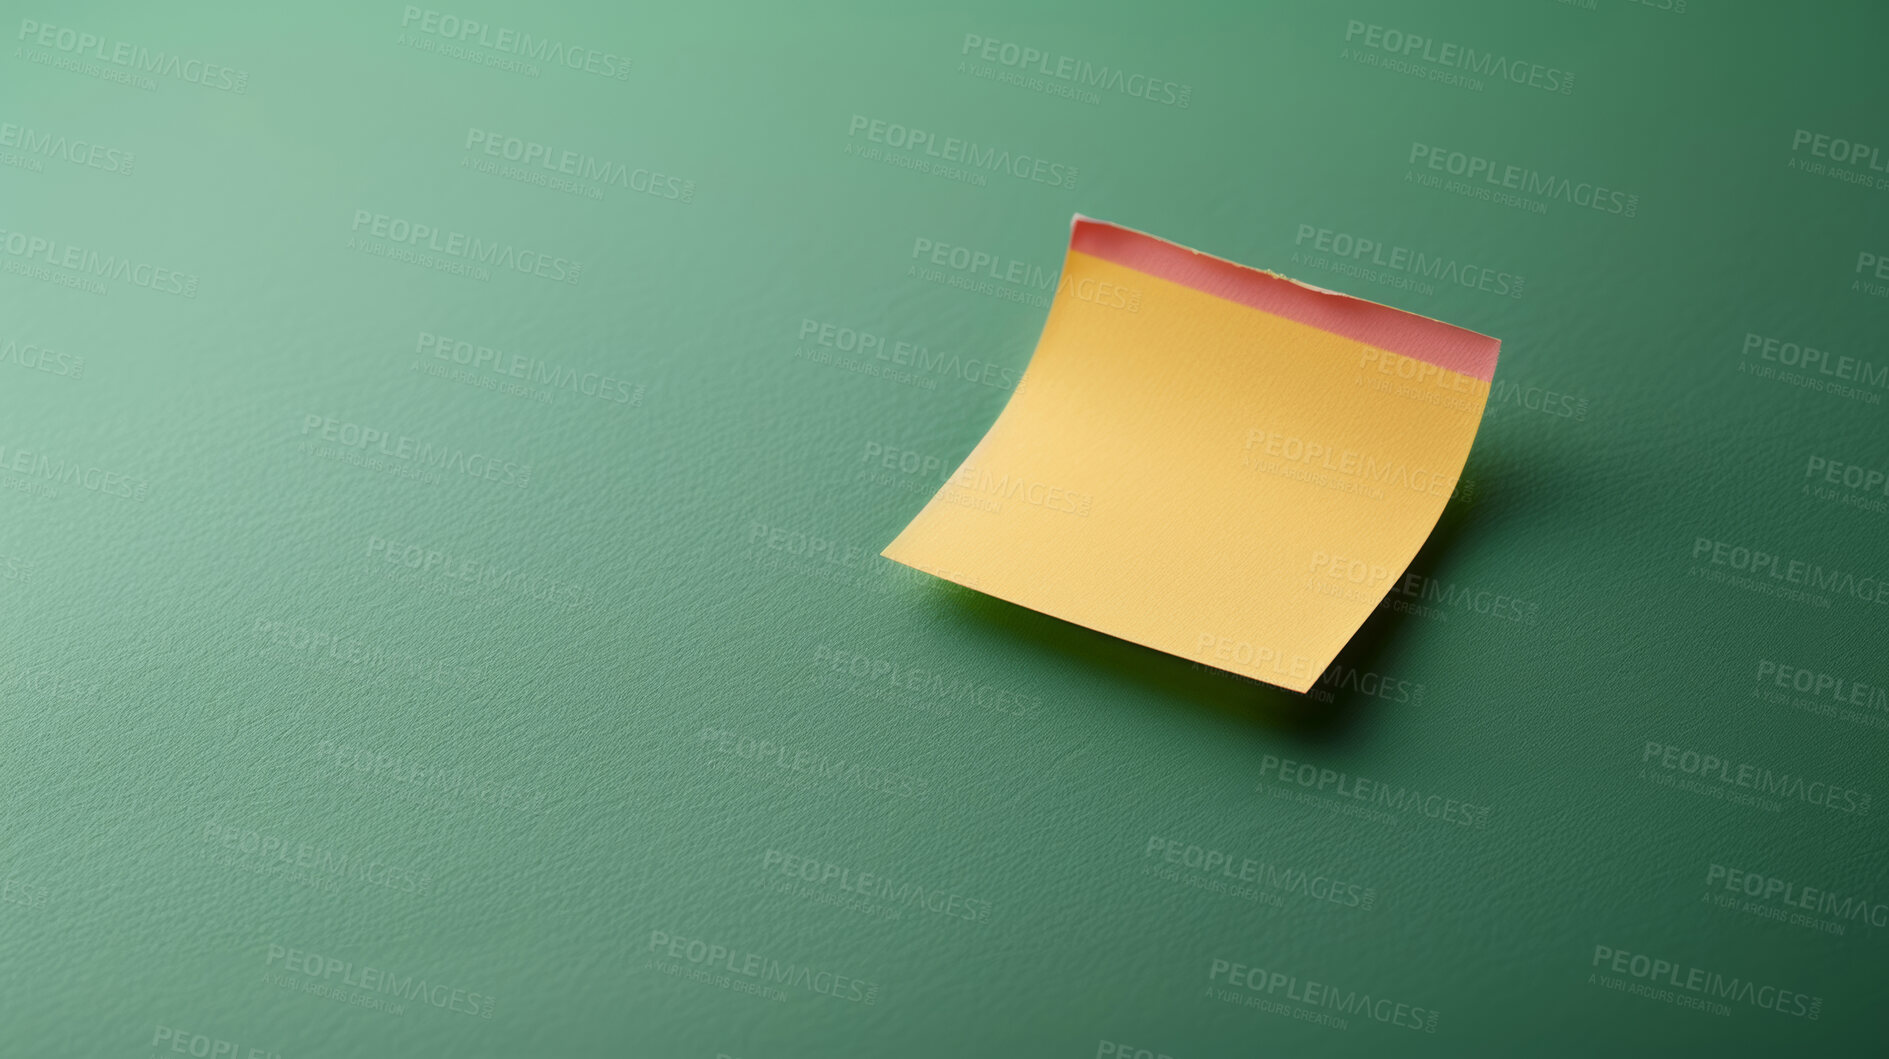 Buy stock photo Sticky note, page and mockup with paper for agenda, tasks or reminder on a green background. Empty space, sign or small document for alert, notification or message on memo, memory or label and post